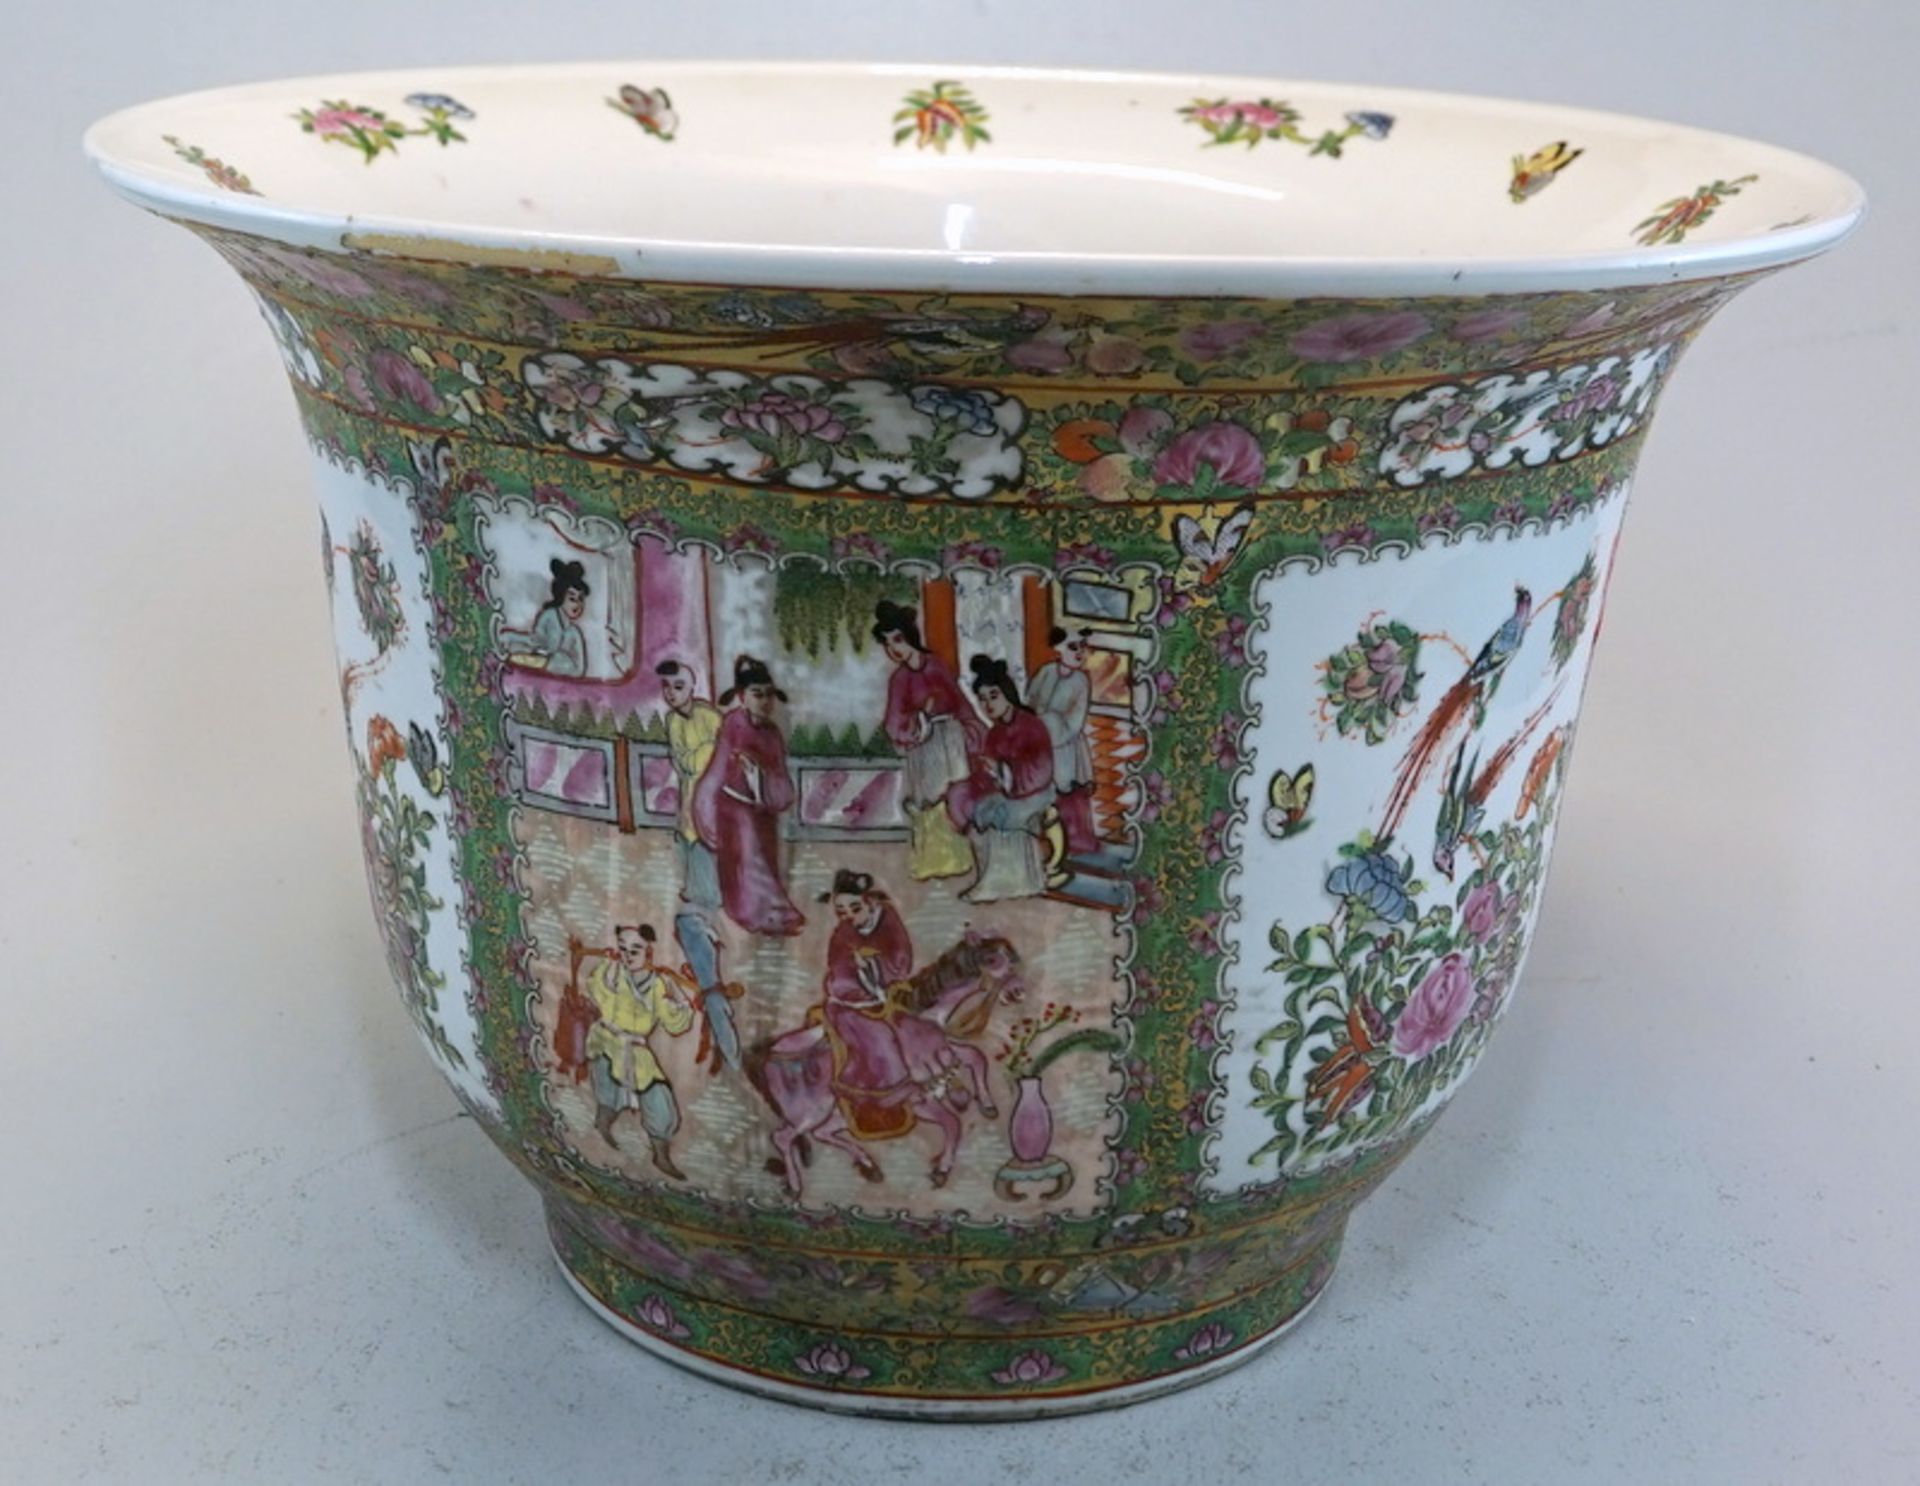 Großer Cachepot Export Pattern -China ca. 1910 late Quing